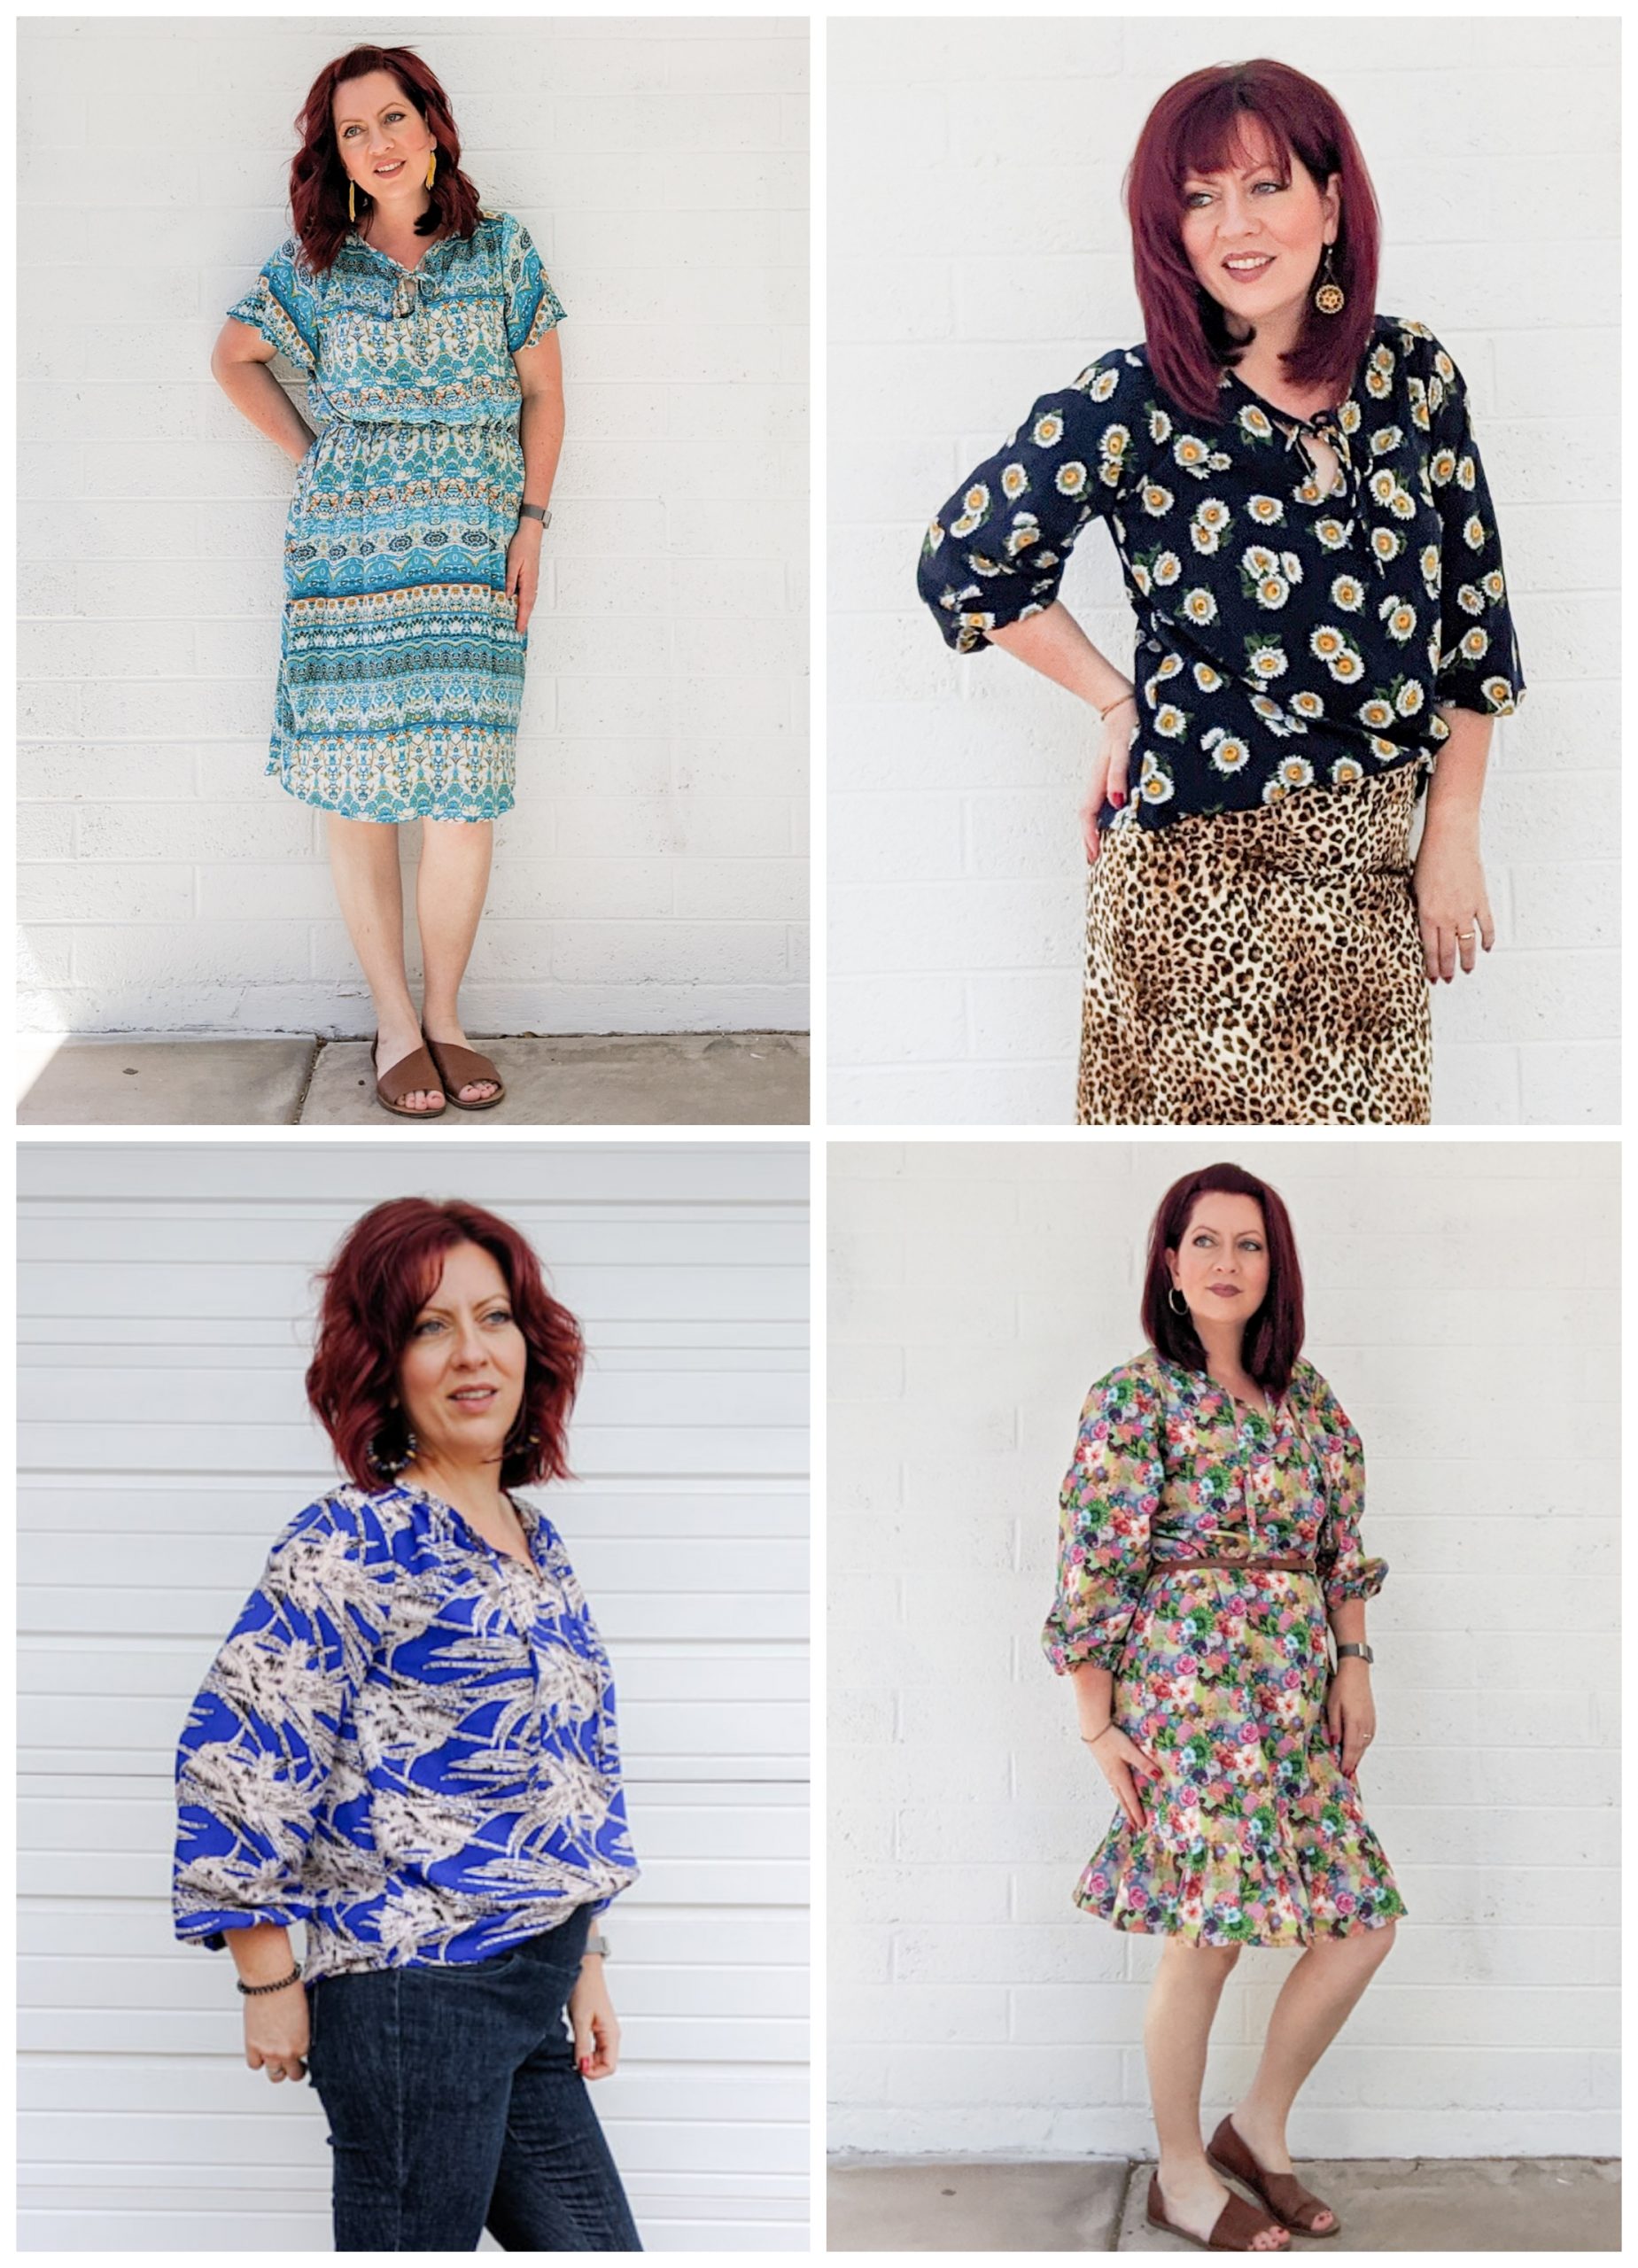 Sew Happy: My Top 4 Love Notion Patterns - Koetiquemade